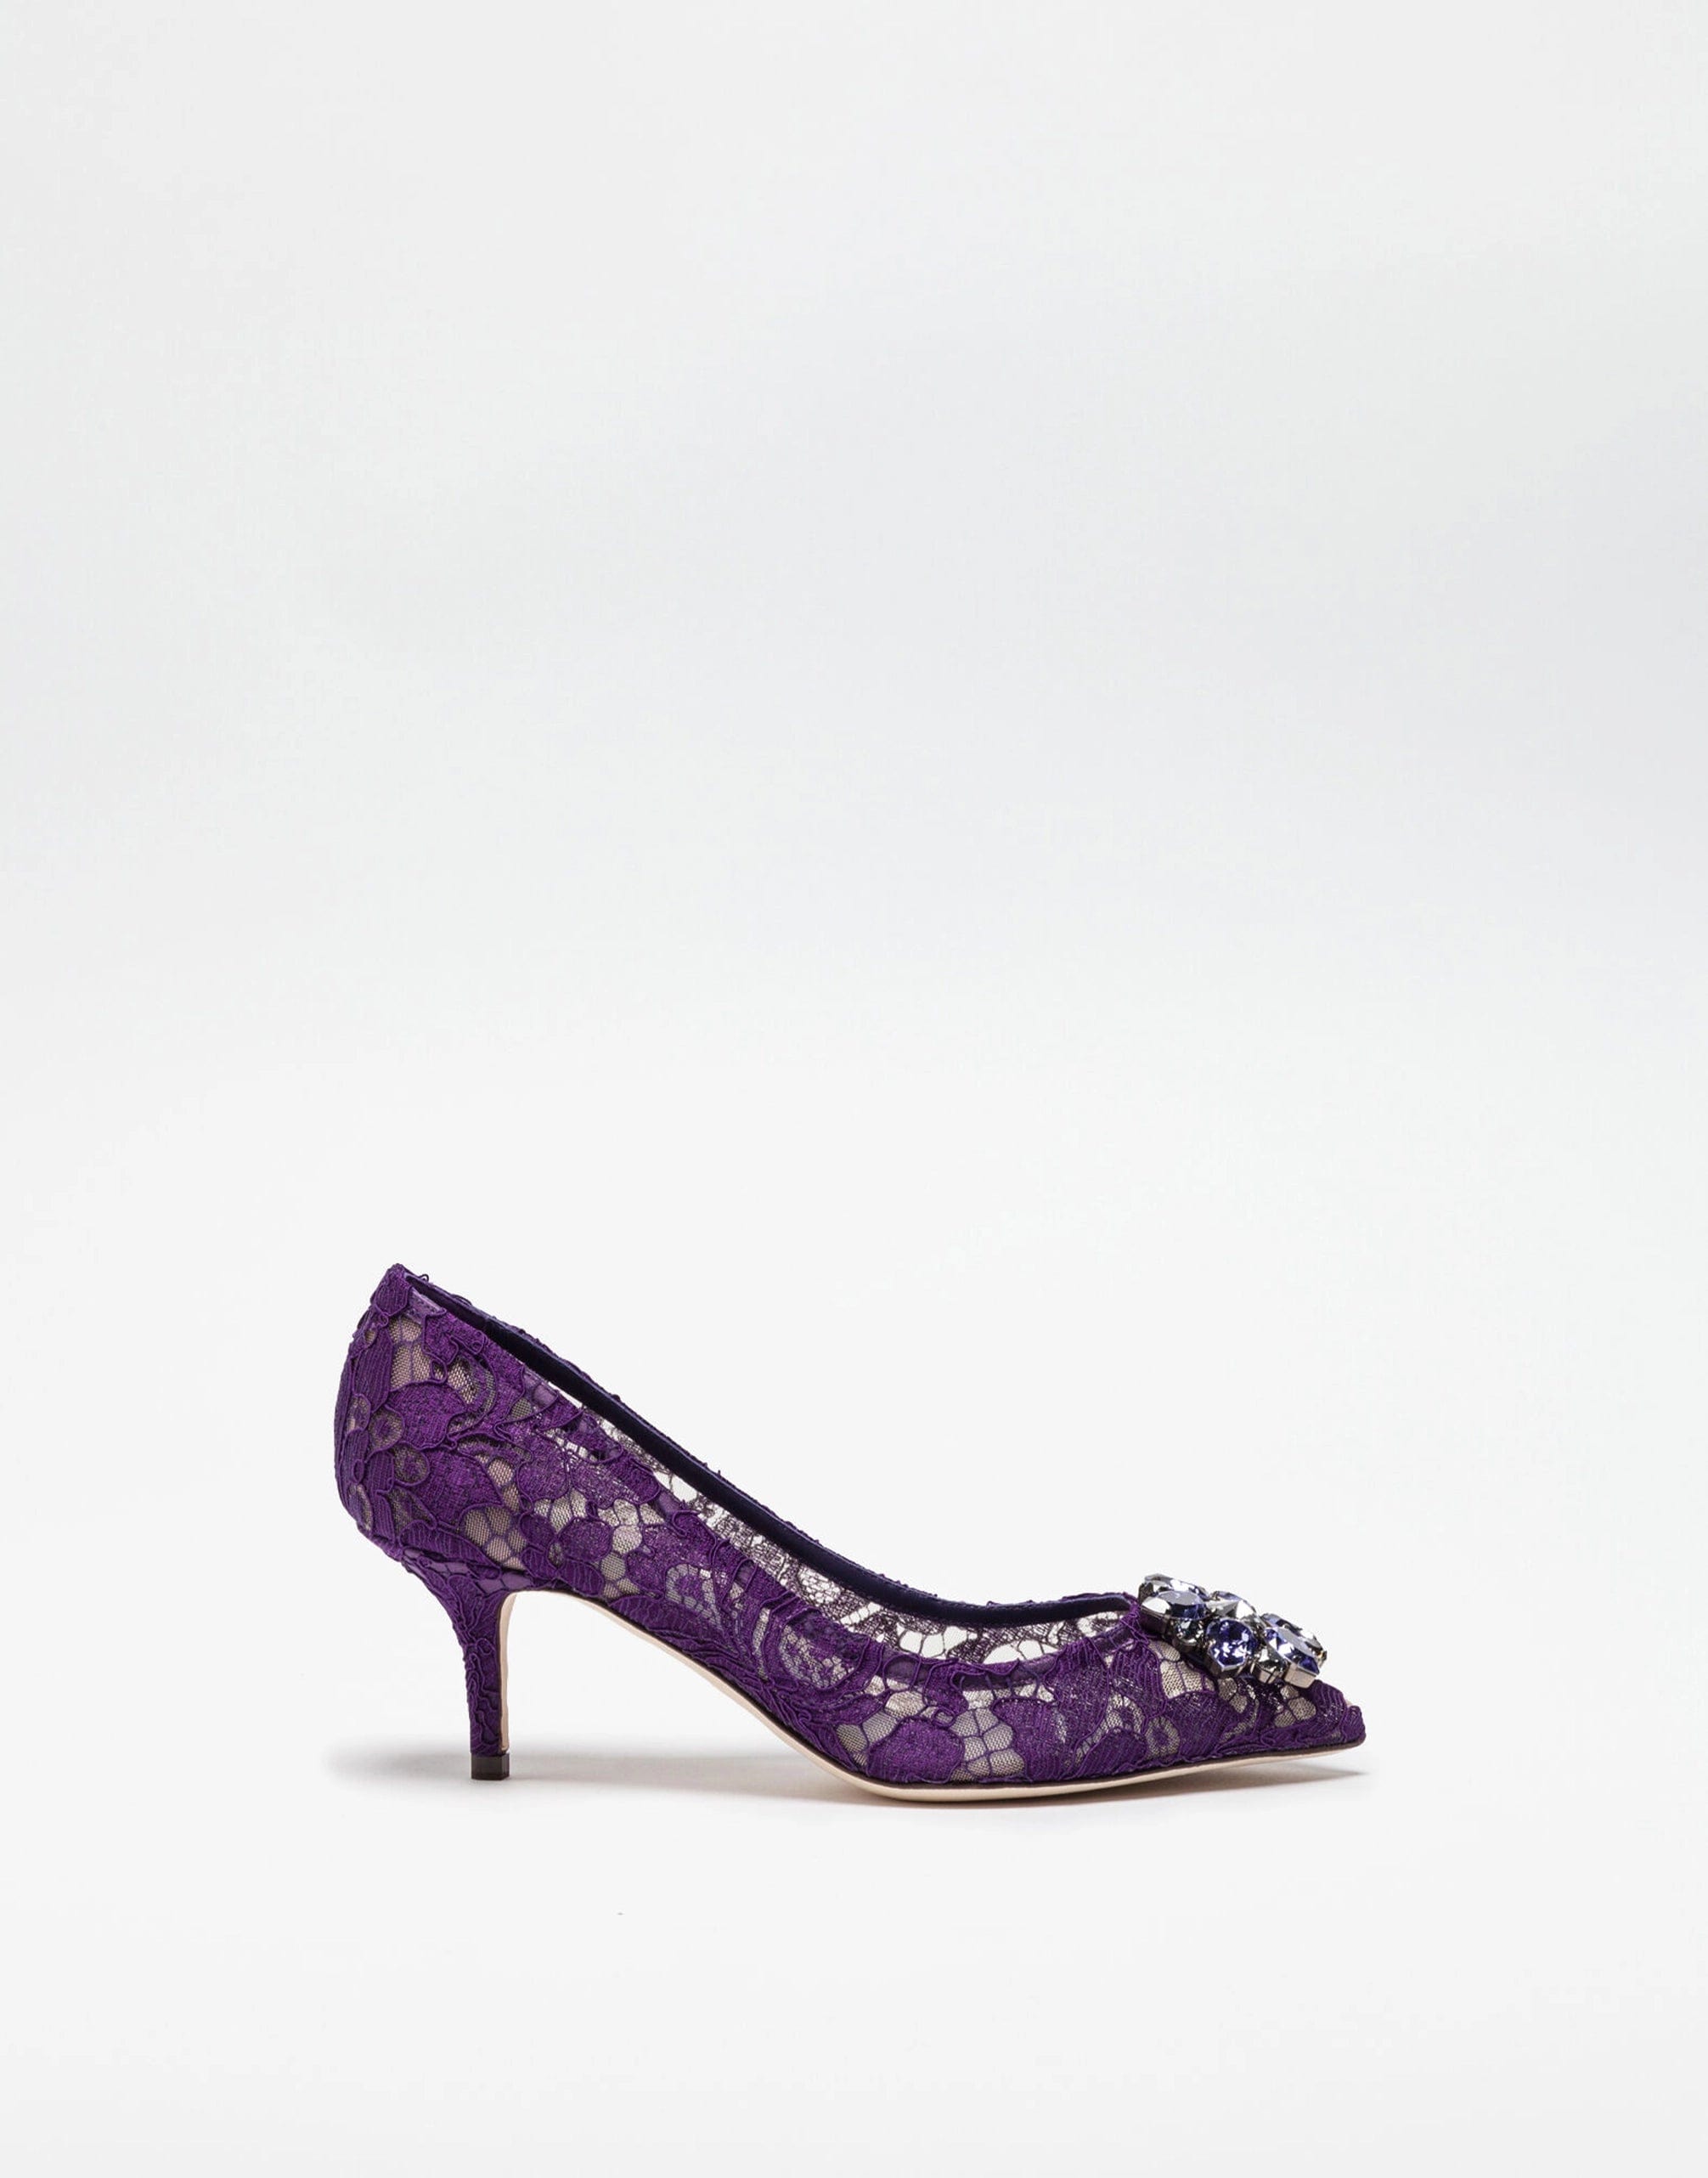 Dolce & Gabbana Lace Rainbow Pumps With Brooch Detailing